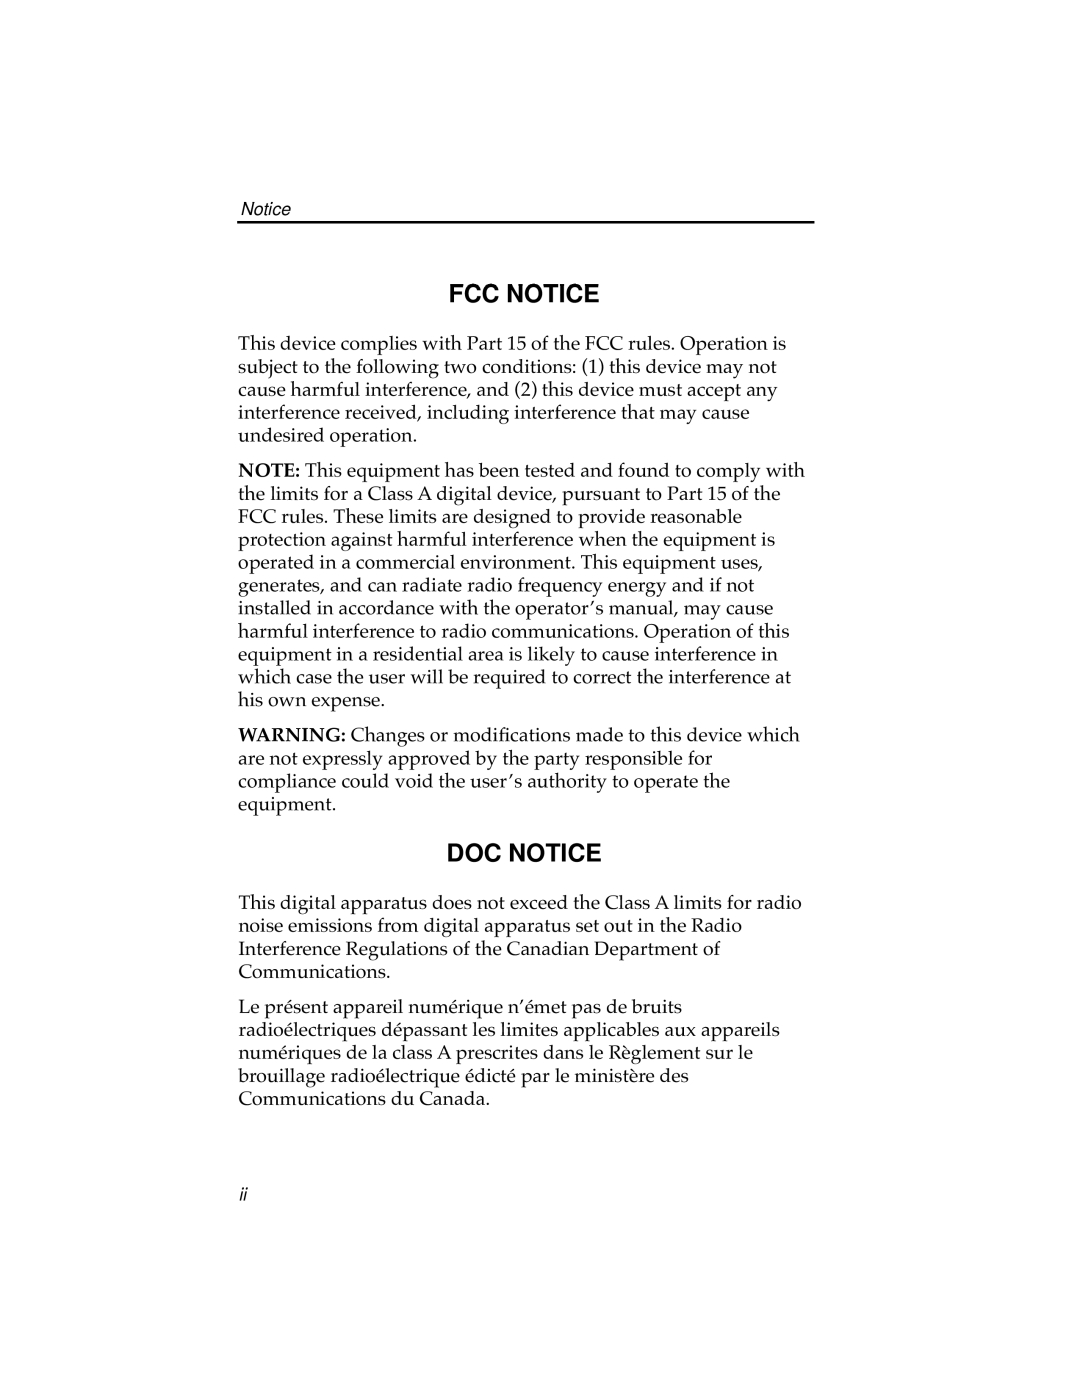 Cabletron Systems 7C04 Workgroup manual Fcc Notice, Doc Notice 